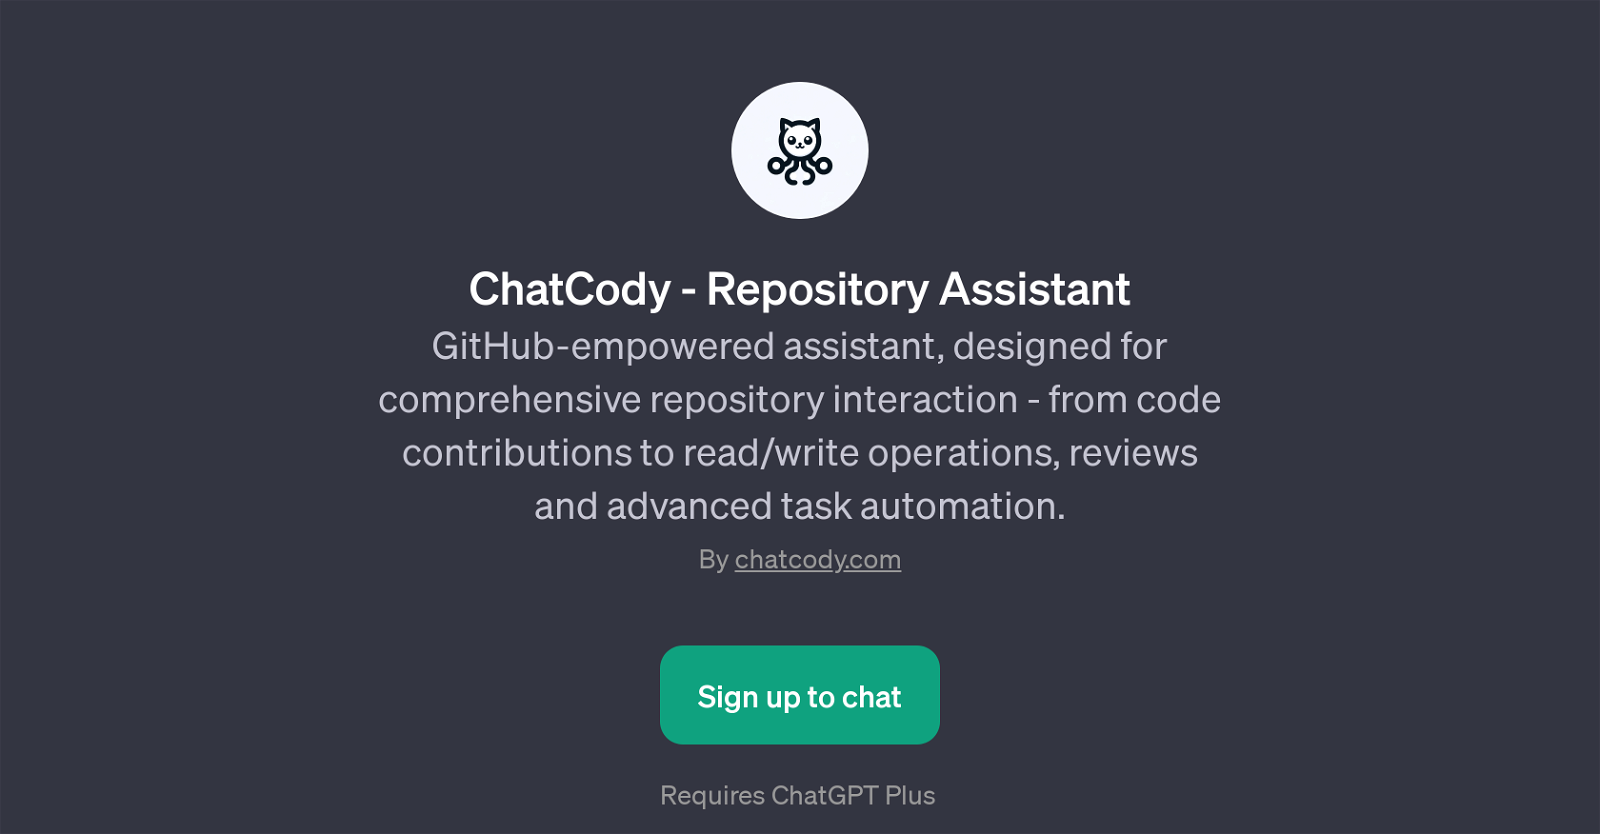 ChatCody - Repository Assistant website